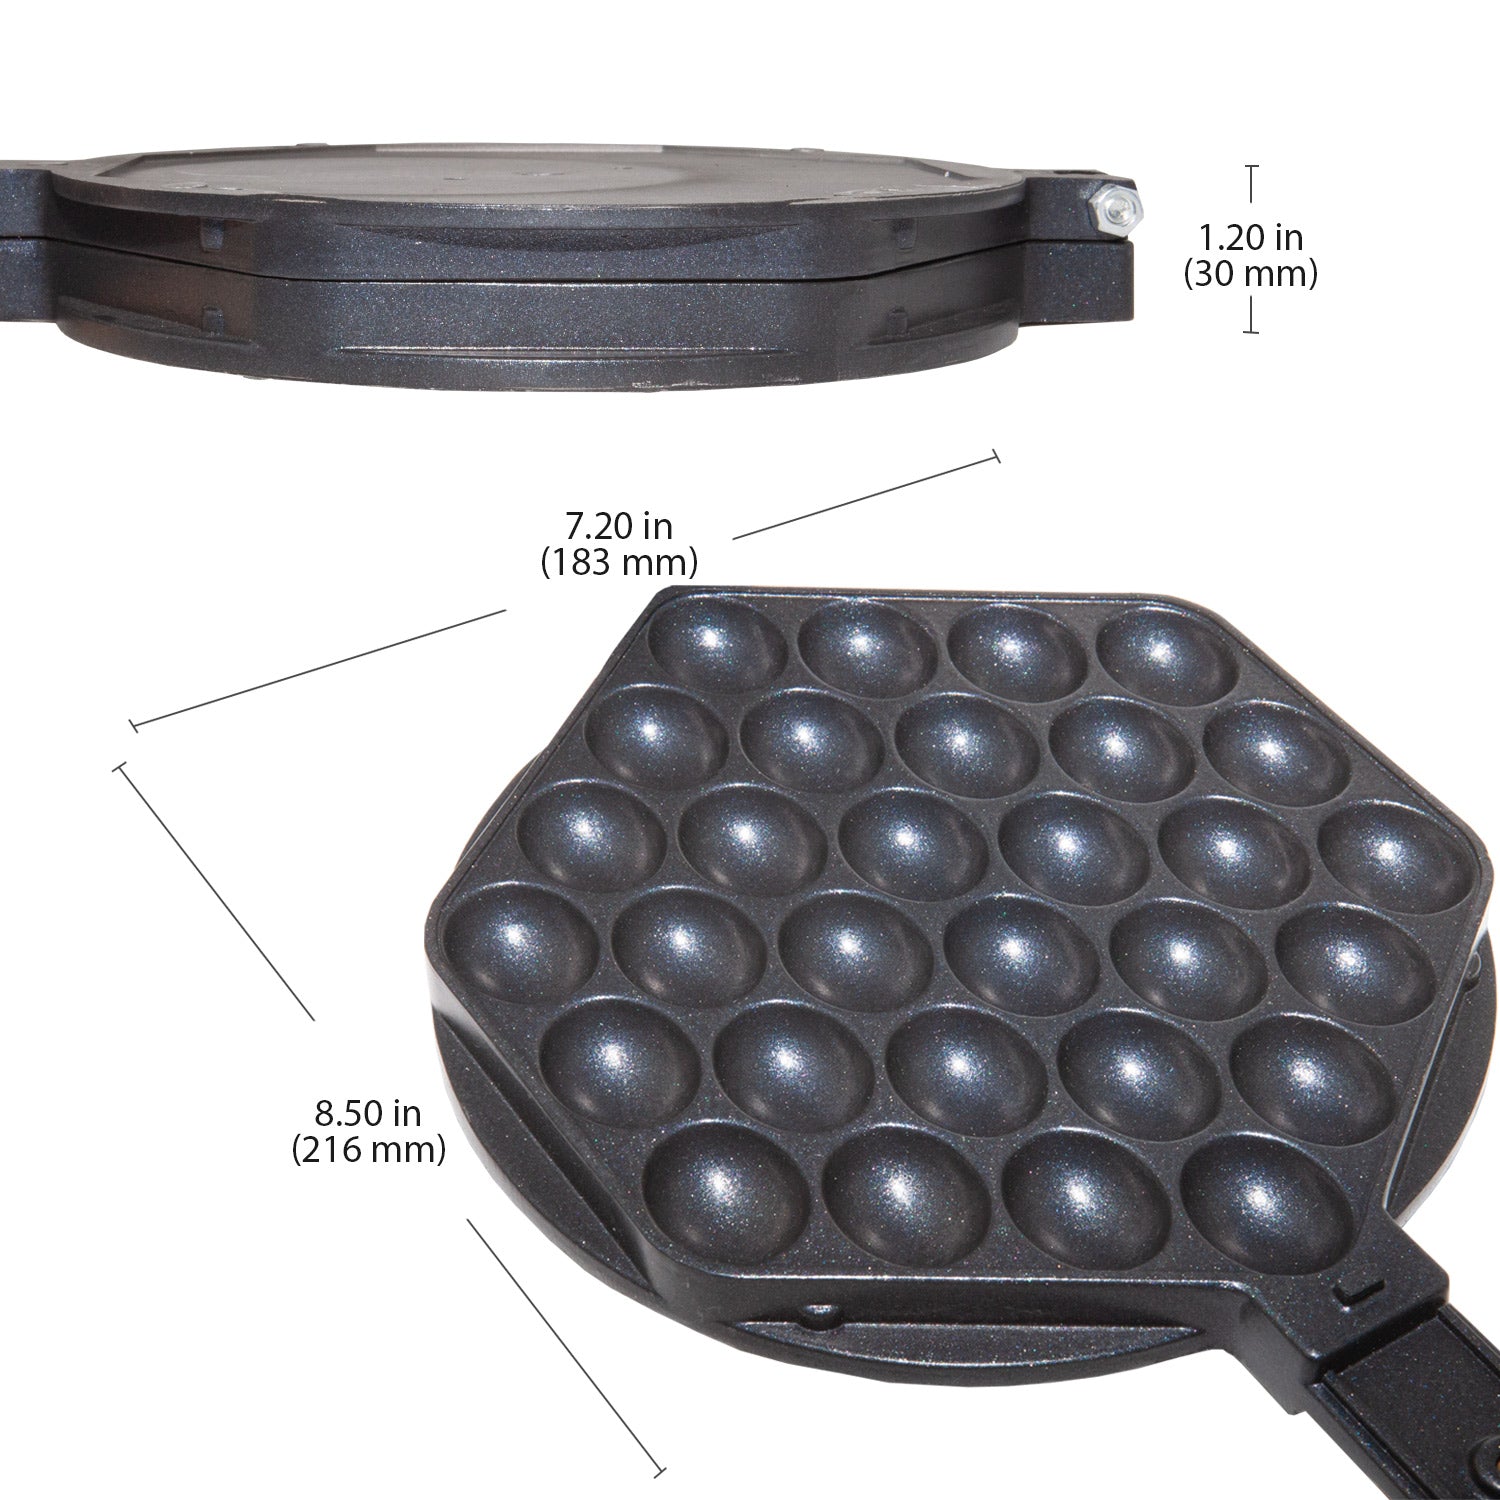 P_FY6-M Bubble Waffle Maker | Egg Waffle Maker Mold | Replaceable 180 Degree Rotating Waffe Iron | Nonstick